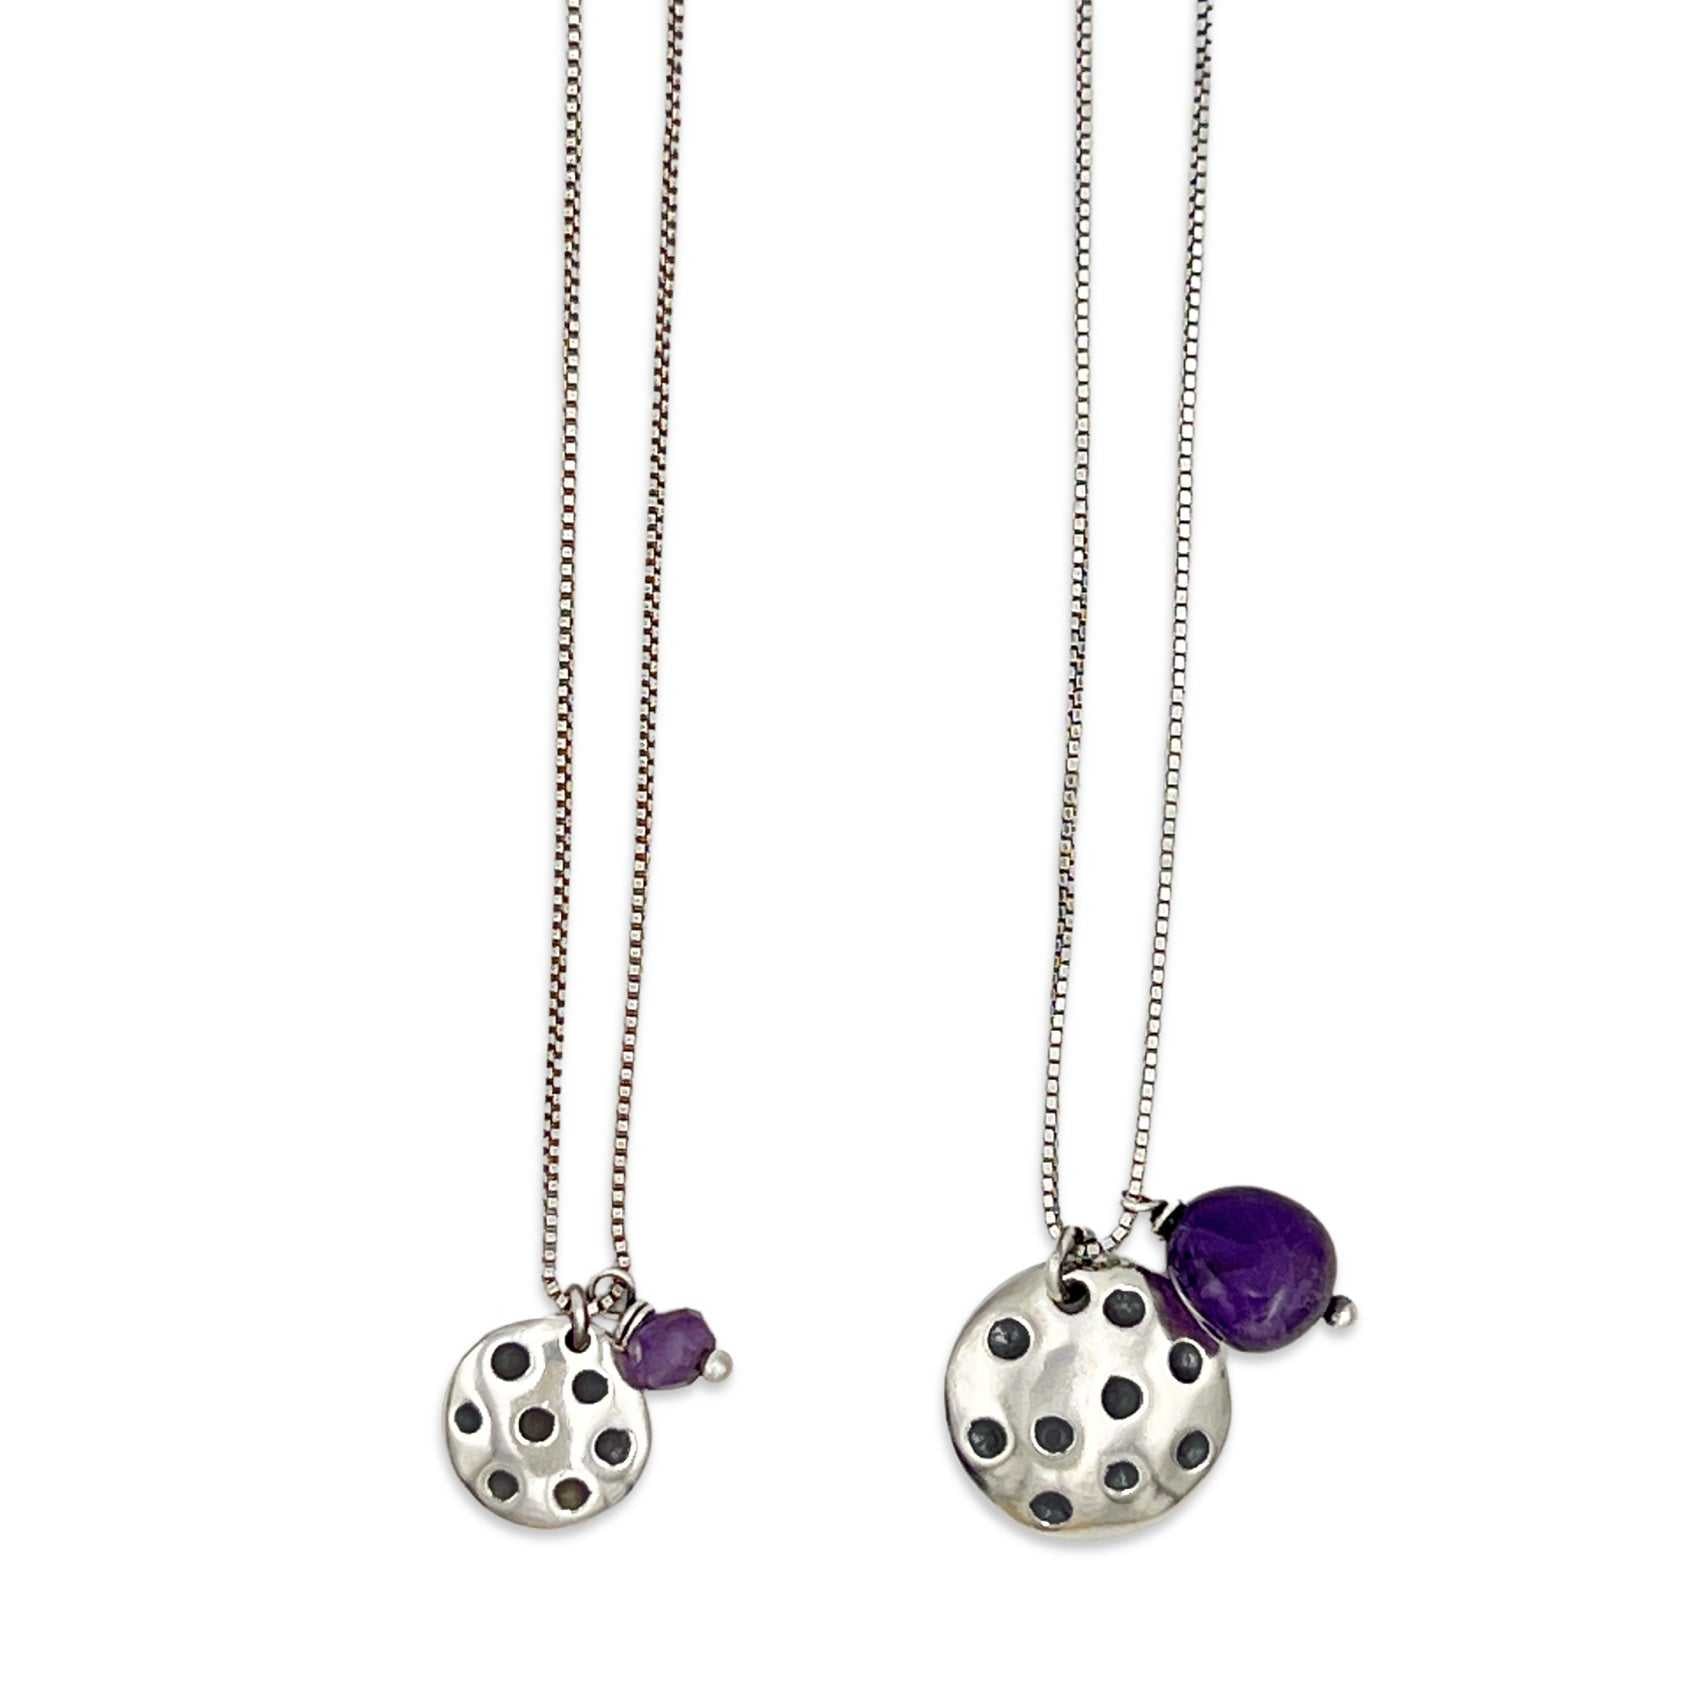 Pickle Ball Charm Necklace with Amethyst